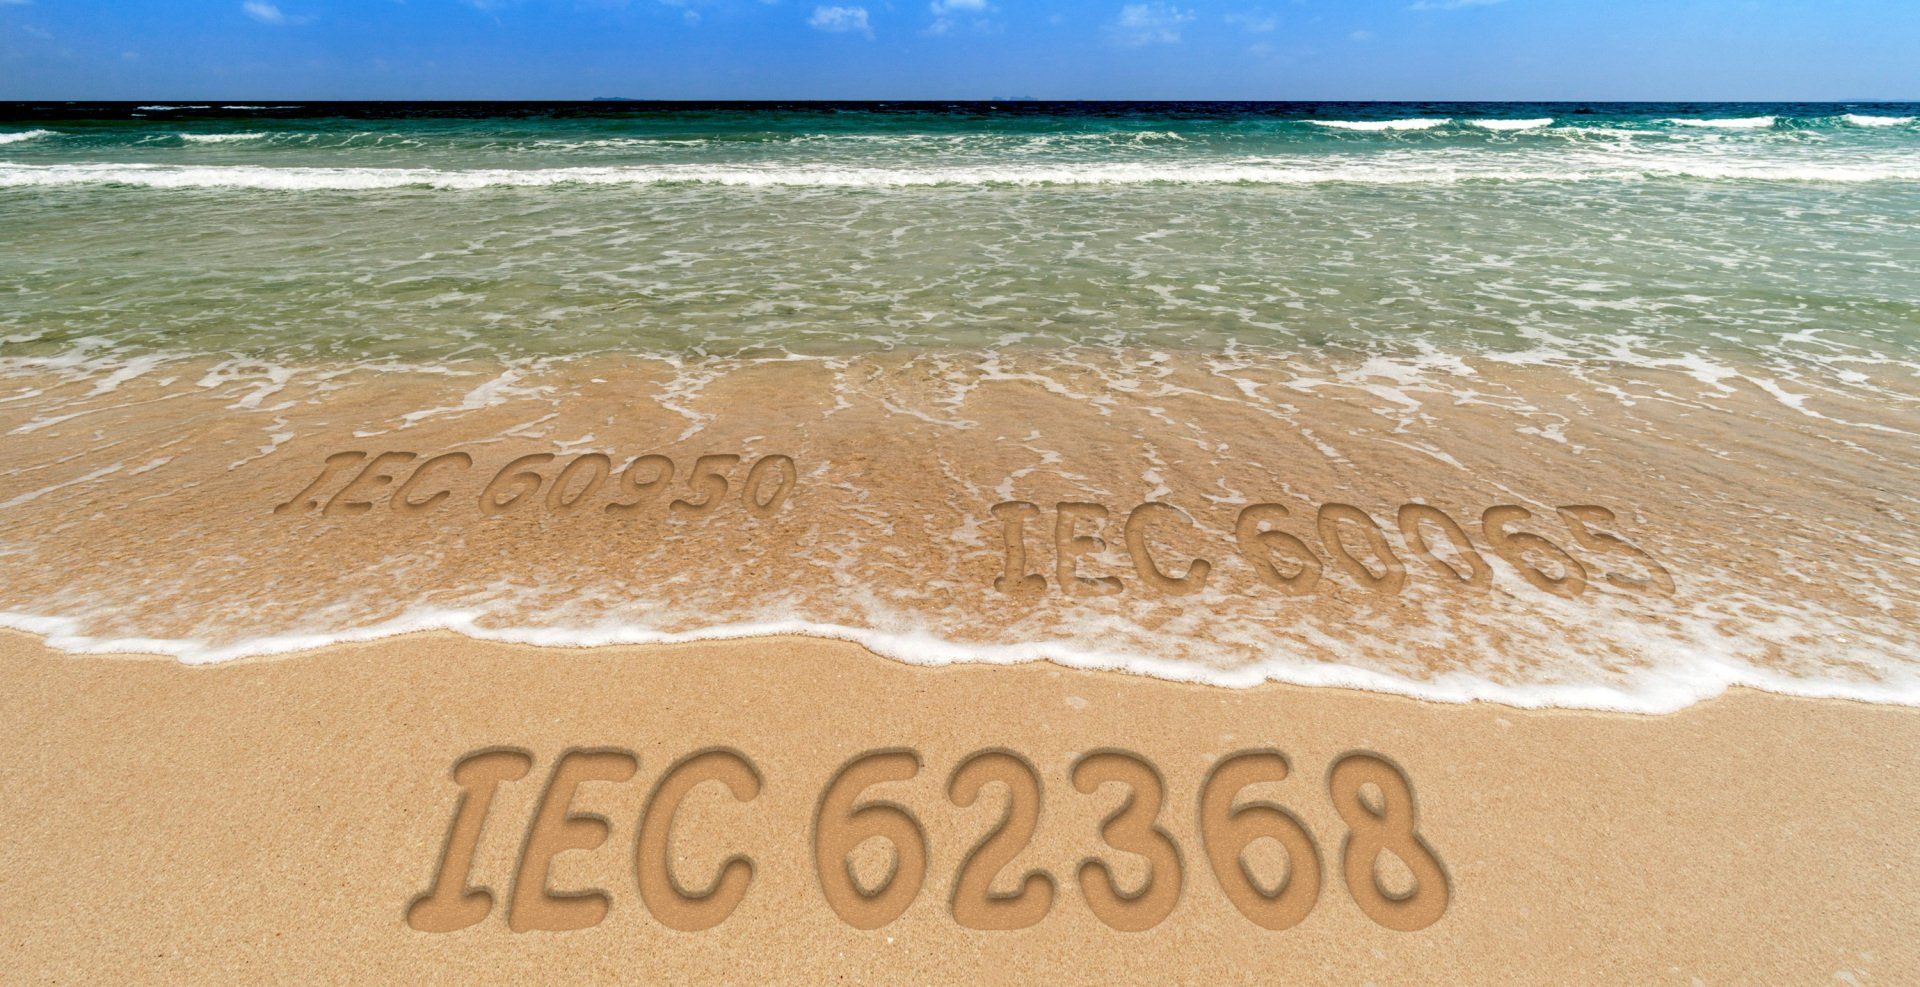 The word iec is written in the sand on the beach.